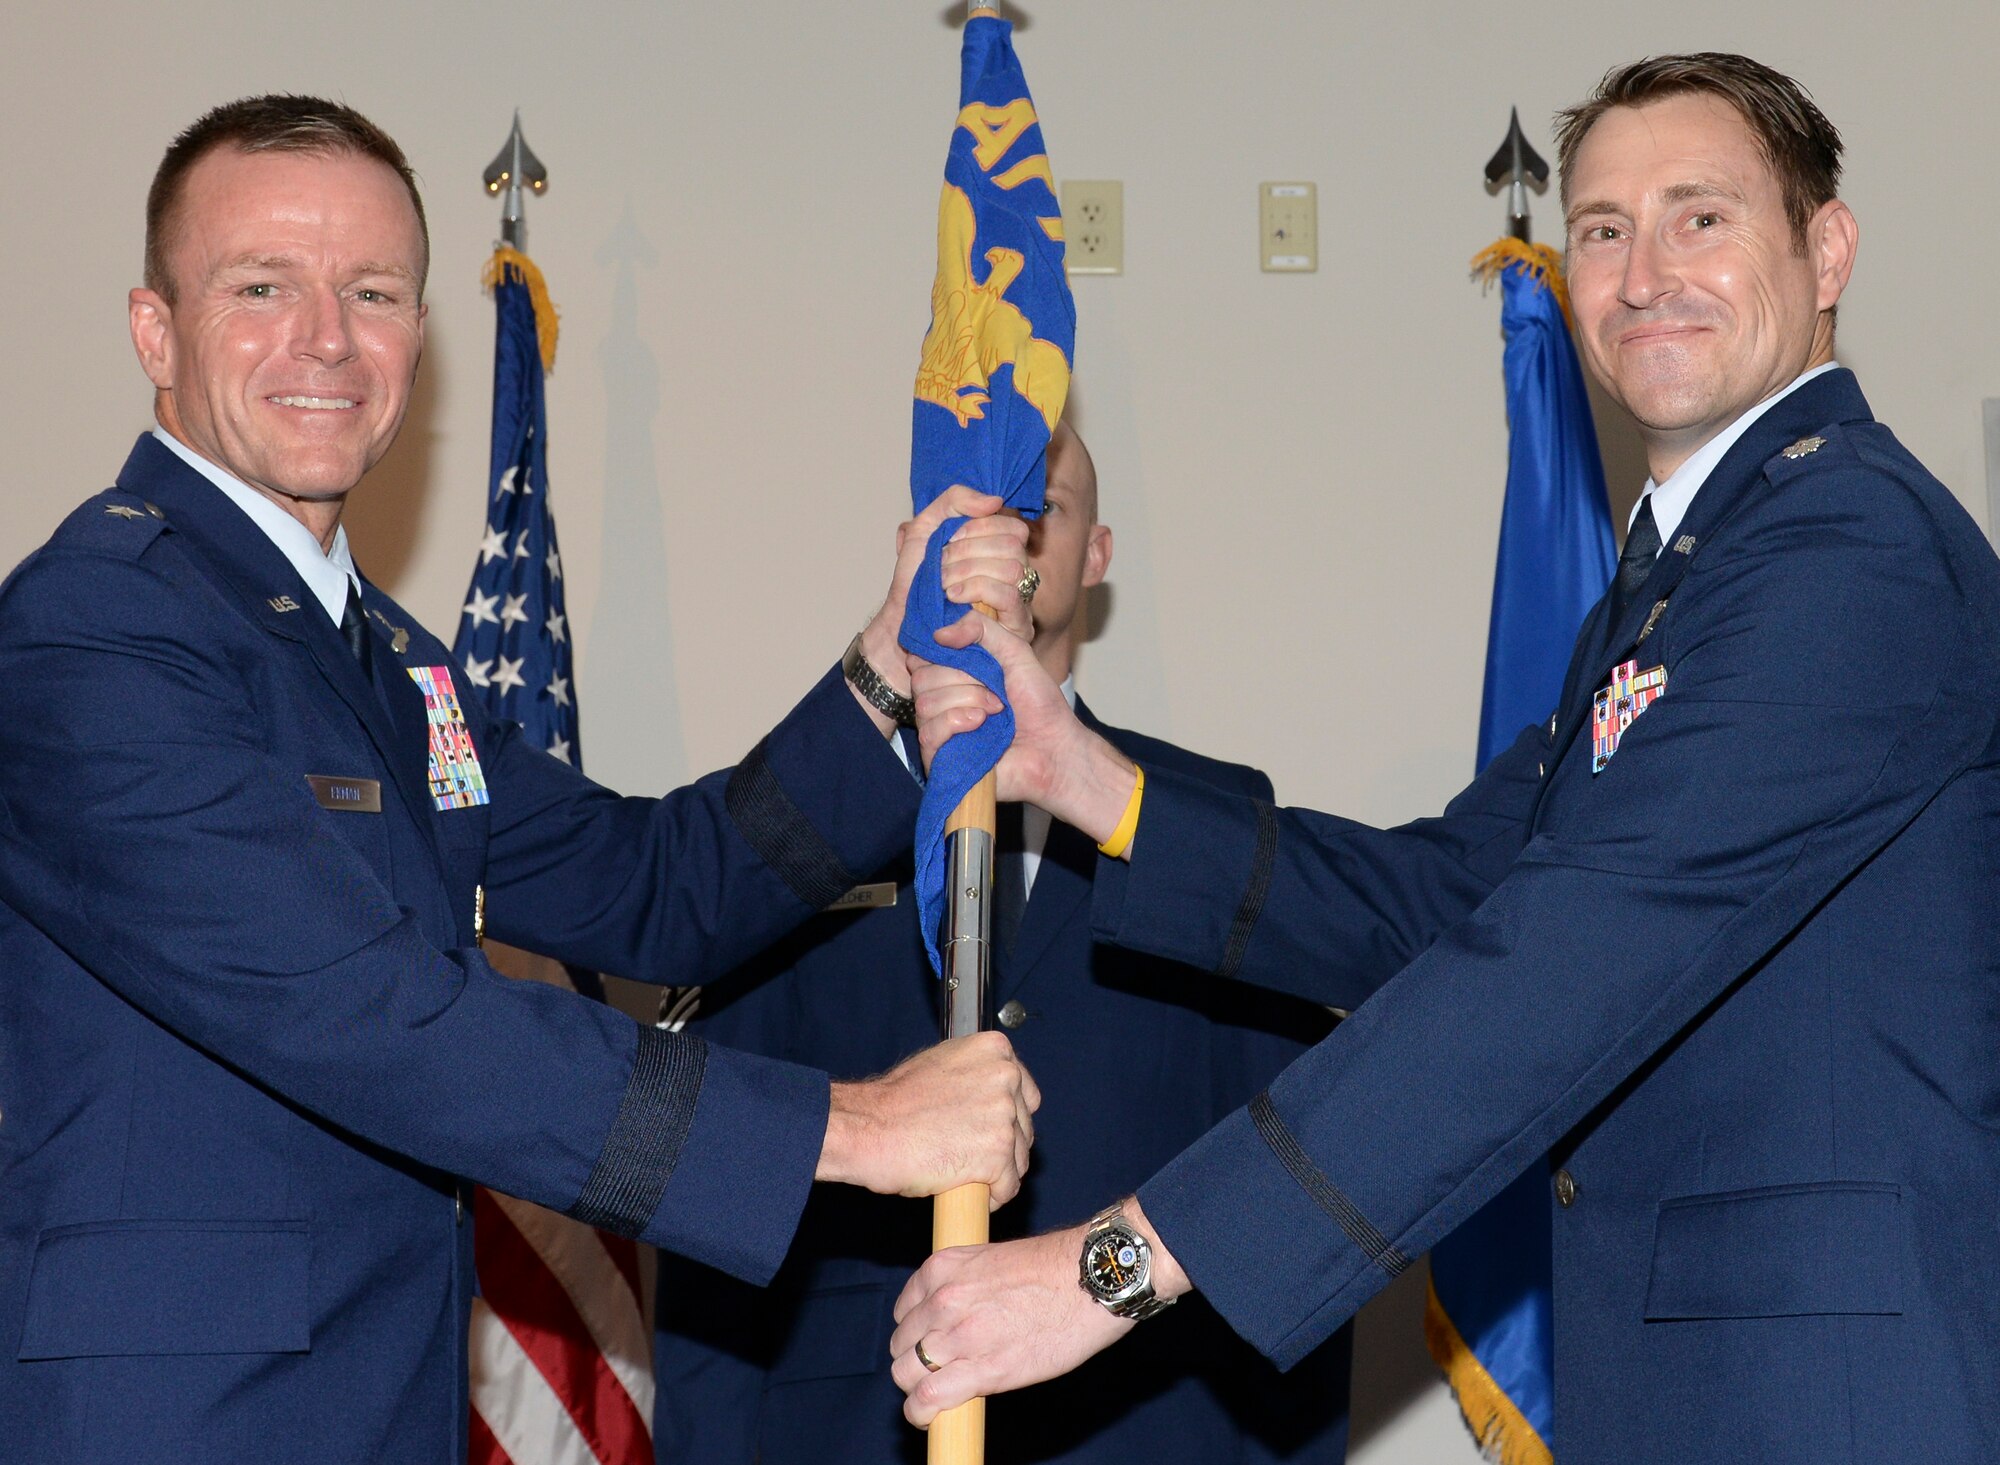 U.S. Air Force Lt. Col. Gene M. Manner, commander, Air Force Rescue Coordination Center accepts the AFRCC guidon from Brig. Gen. Kenneth P. Ekman, vice commander, 1 AF (Air Forces Northern), during a change of command ceremony July 2, 2019, Tyndall AFB, Fla.